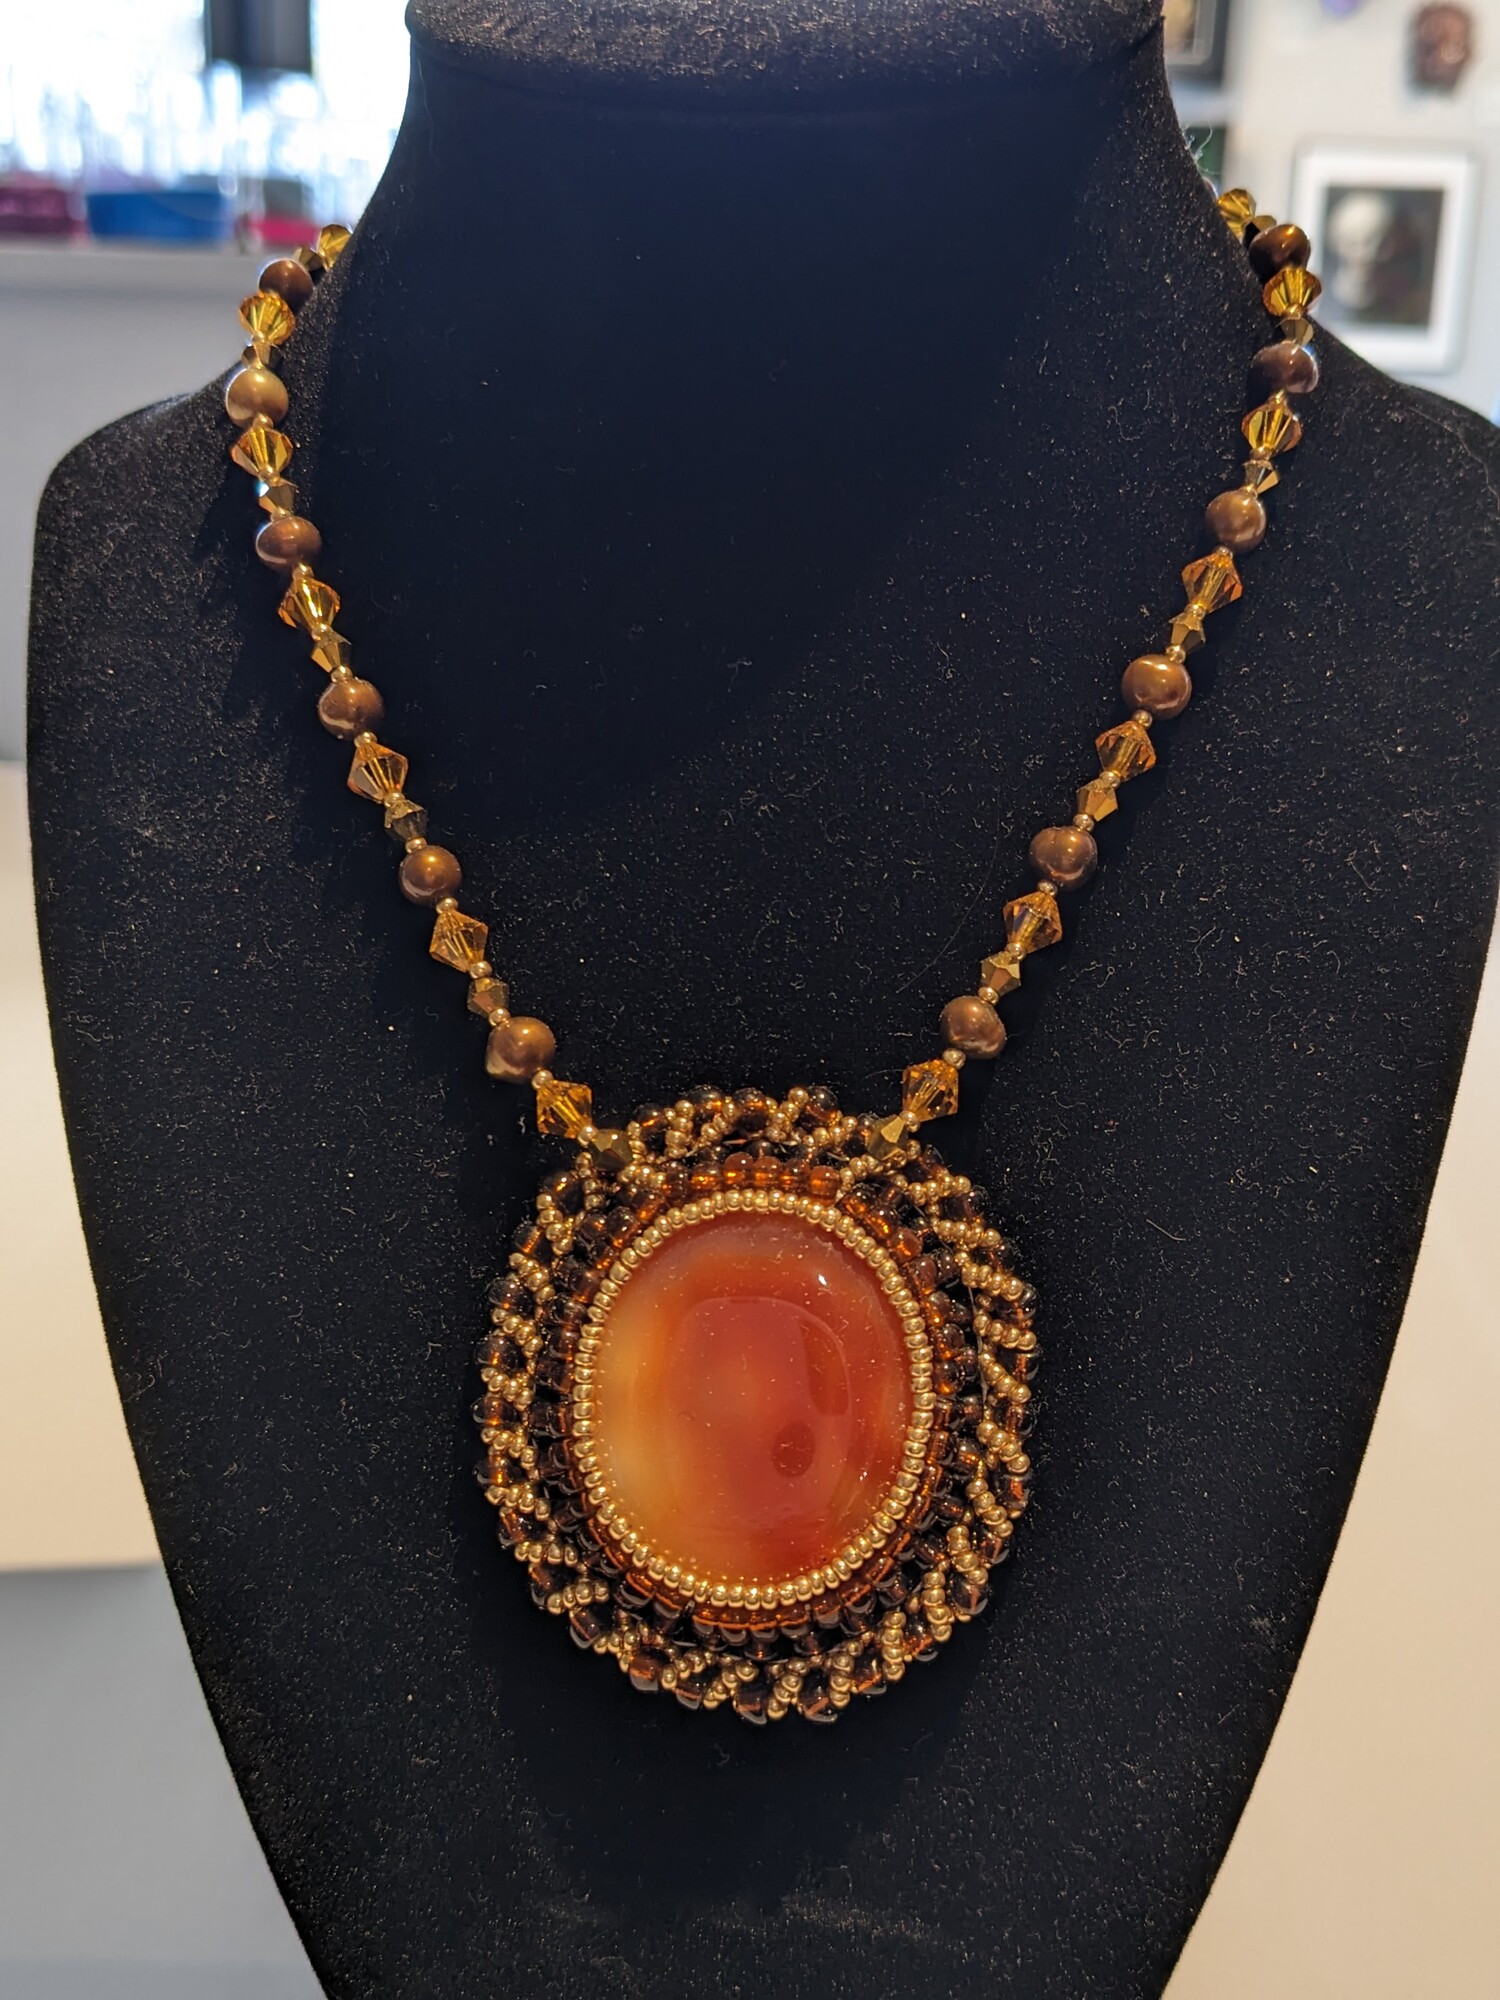 Carnelian Pearl Necklace
Jama Watts
Jewelry (Bead Embroidery)
18 in length, pendant measures 2.25 in length by 2 in wide
Large carnelain cabochon surrounded by copper and gold seed beads and strung on a chain with pearls and leaded glass crystal. Pendant is backed with tan ultrasuede.  Chain ends in a brass lobster clasp.